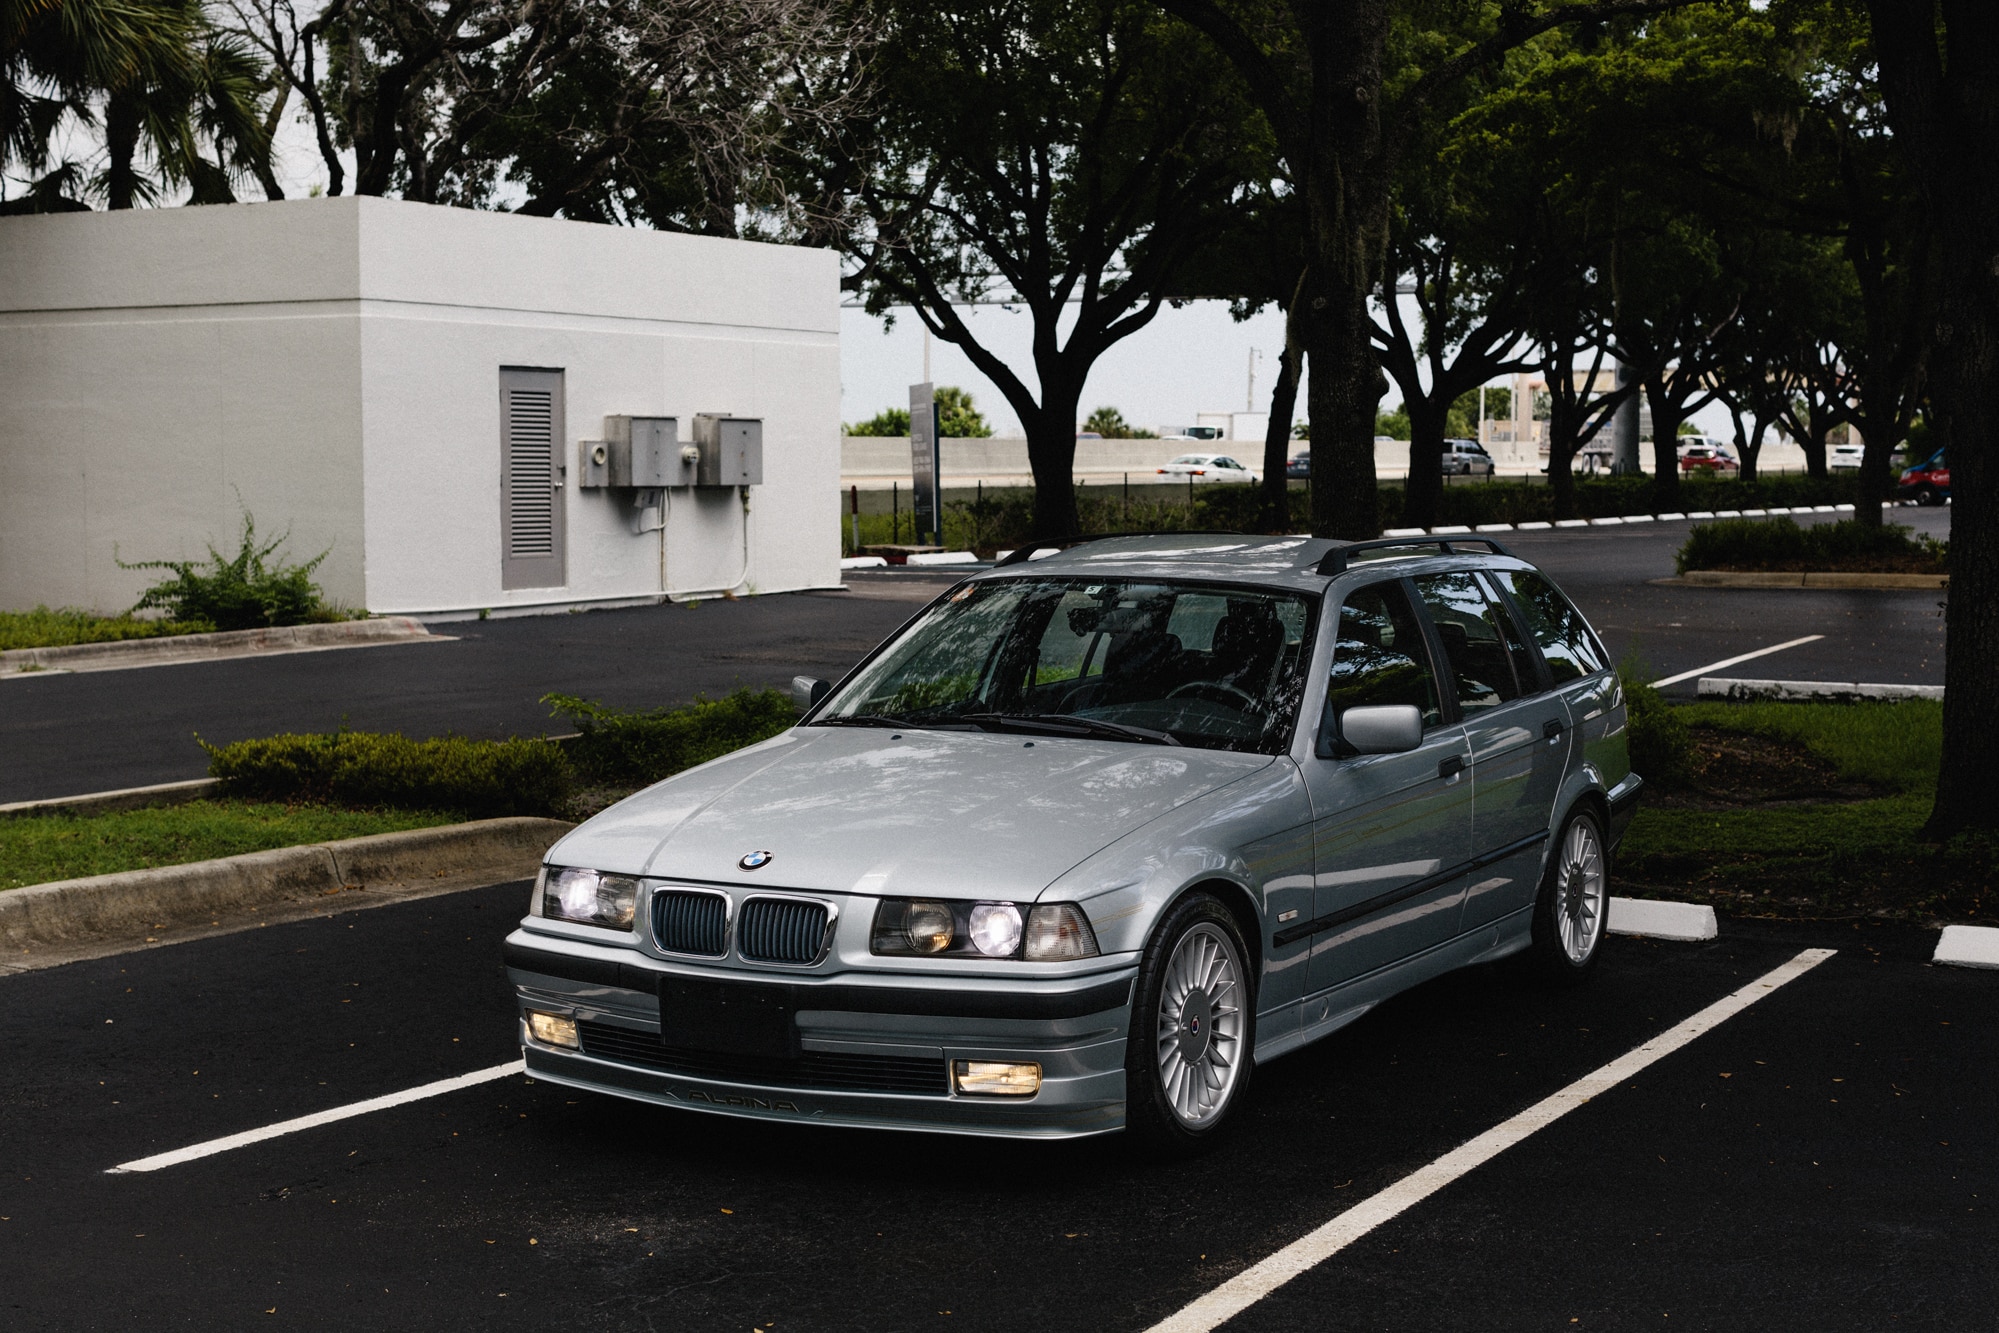 1998 BMW Alpina B6 2.8 Touring (E36) | #111 of 136 units | Arctic Silver-Gold Dekor | Japan Only Model | Great Condition | Drives Well | Extremely Rare & Unique